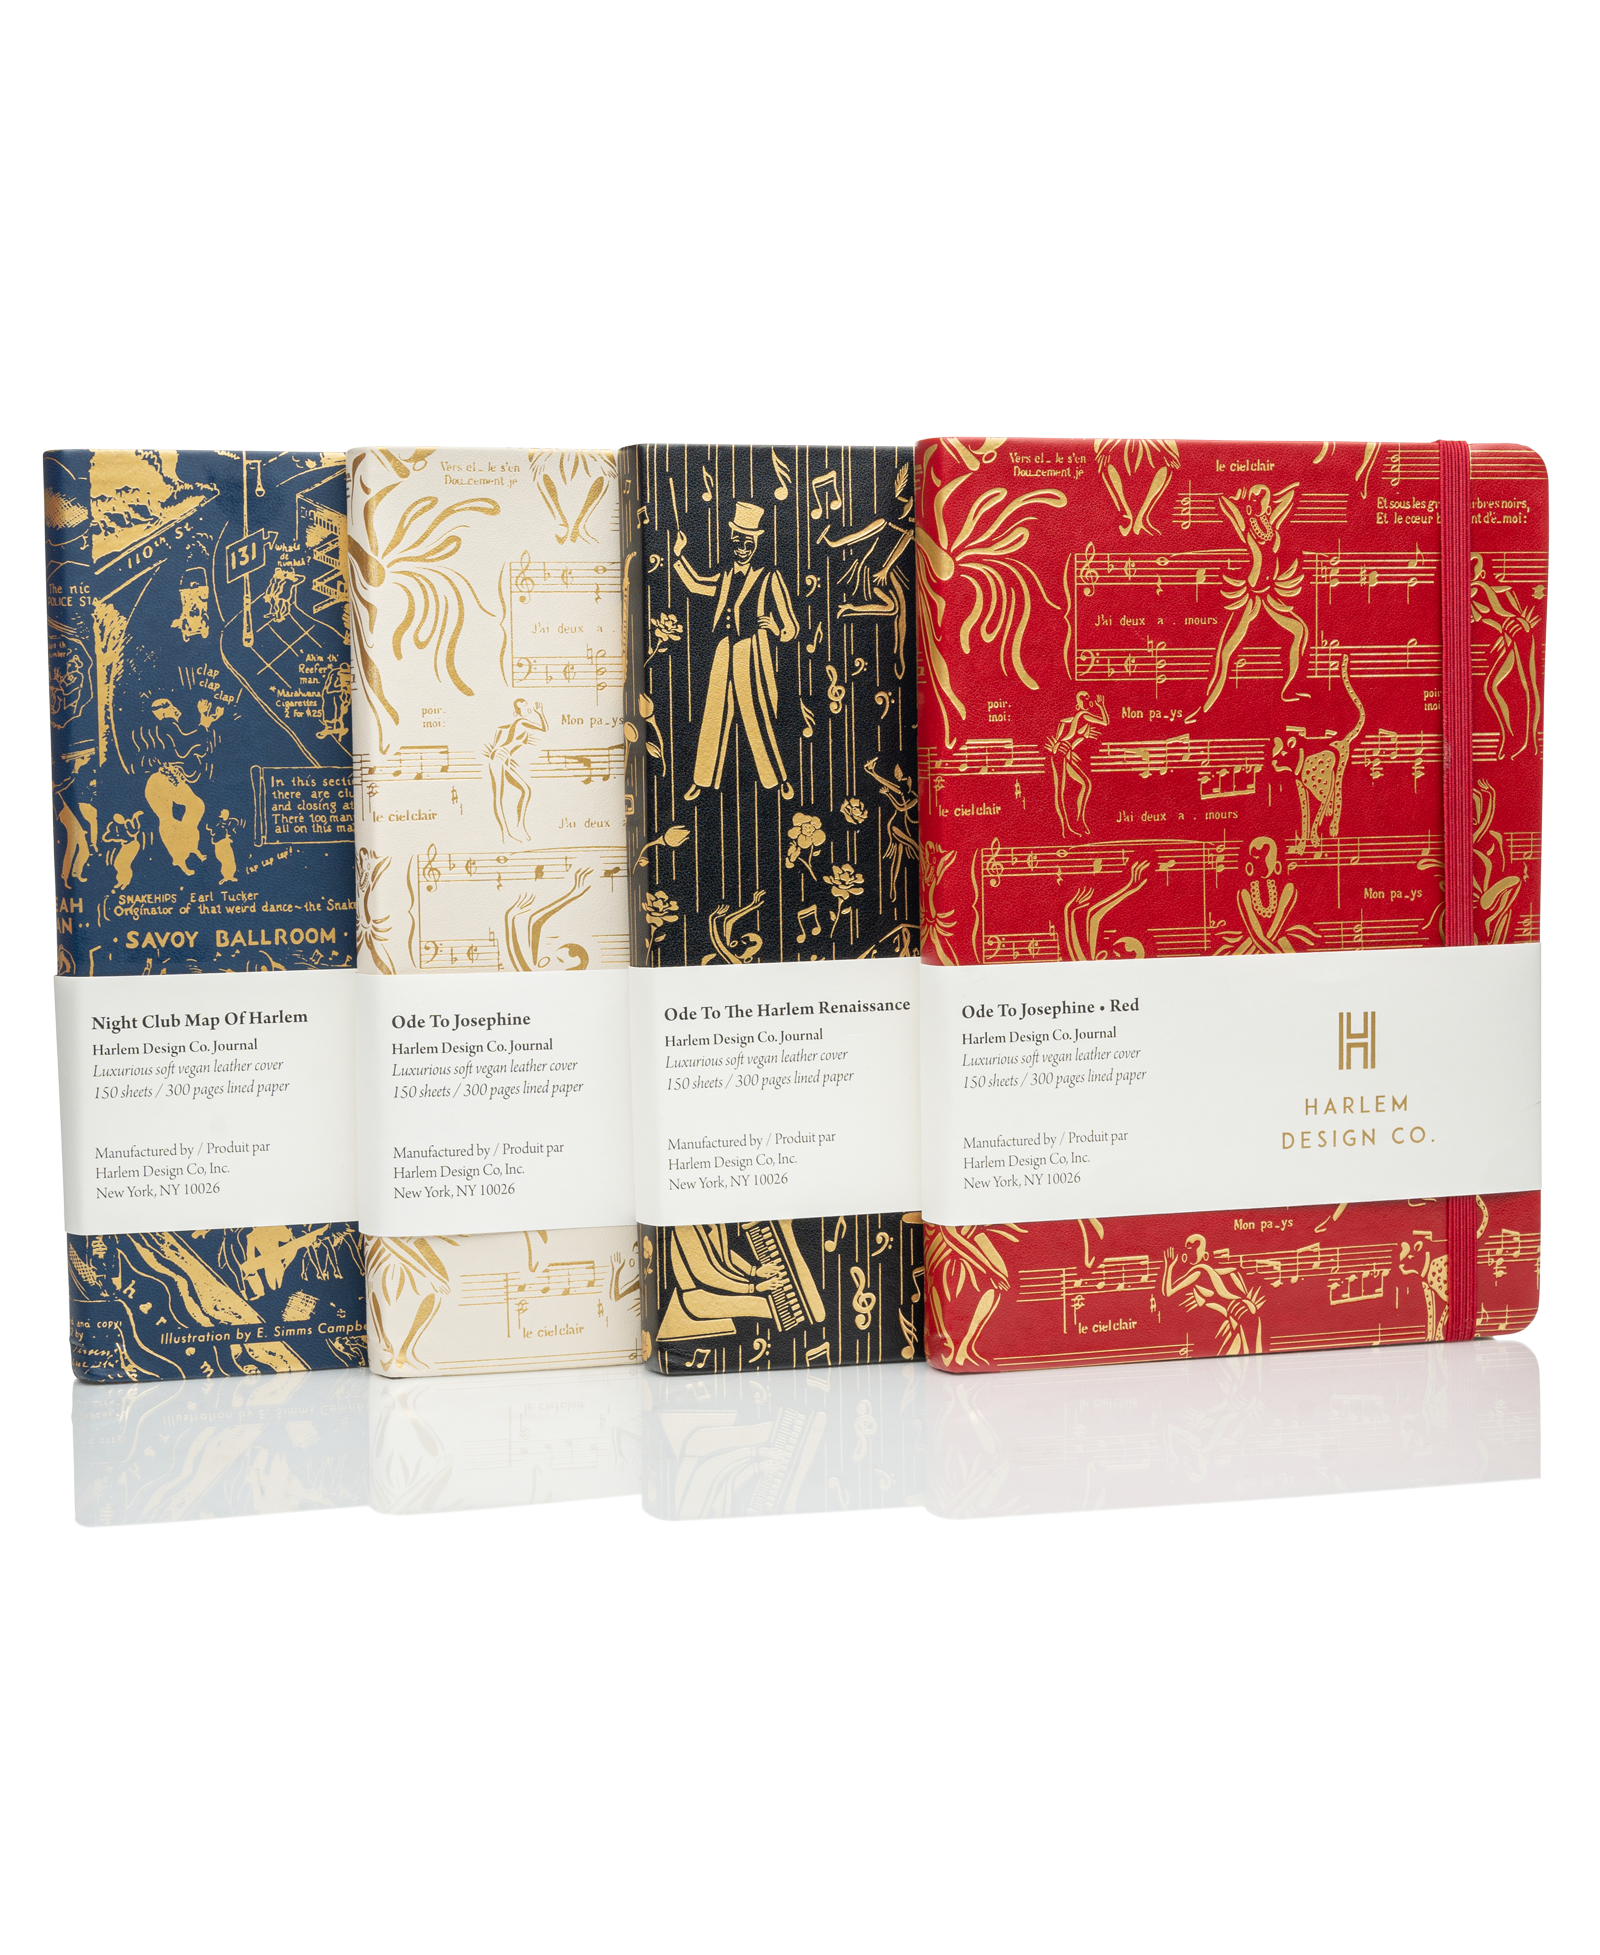 This is a group shot of all four of the Harlem Renaissance inspired journals. The white sleeve with product information is on each of these journals.